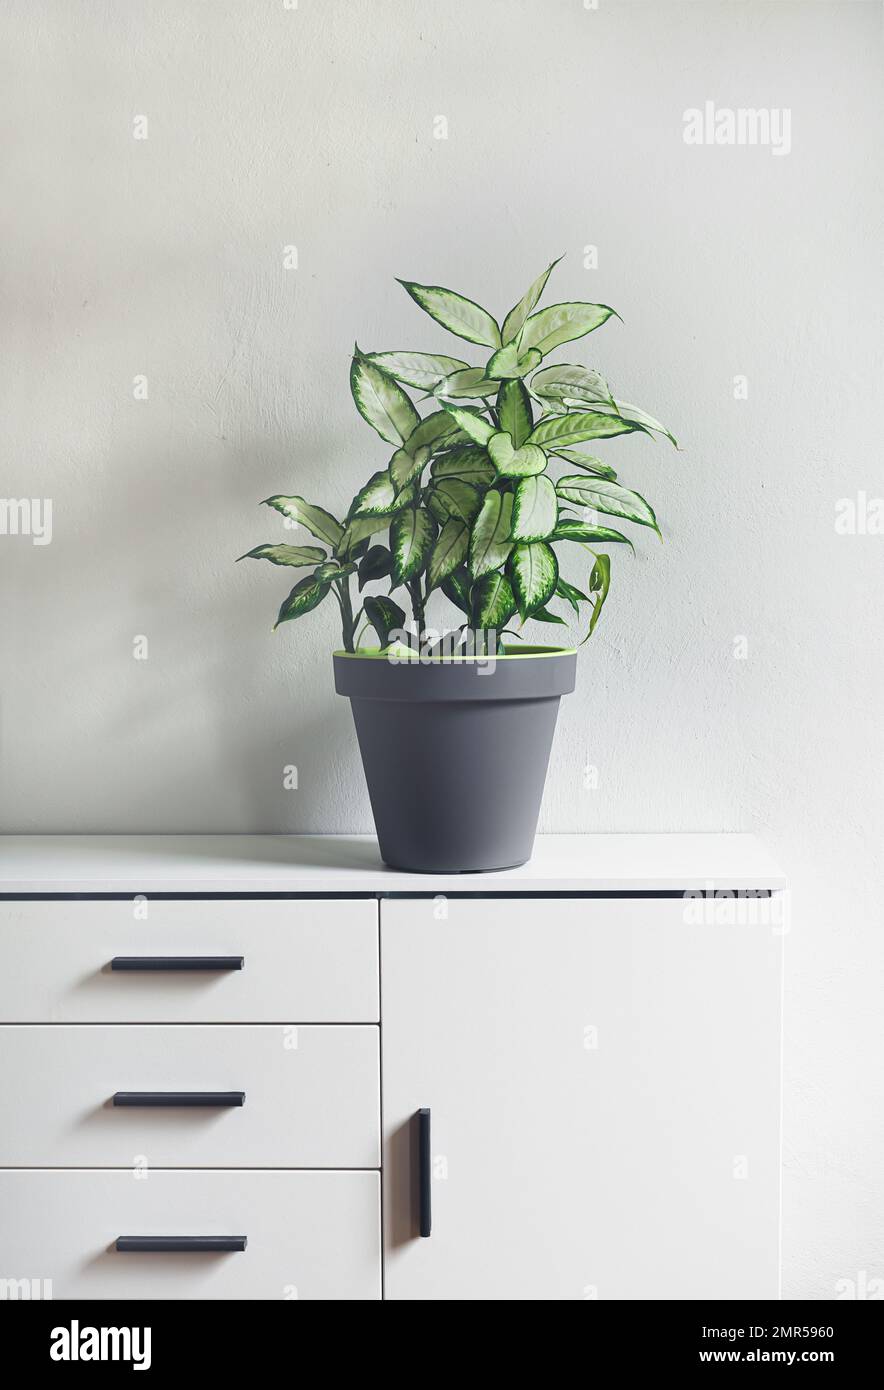 Dumb cane plant or Dieffenbachia in a gray flower pot on a white furniture in a room, minimalism and scandinavian style Stock Photo